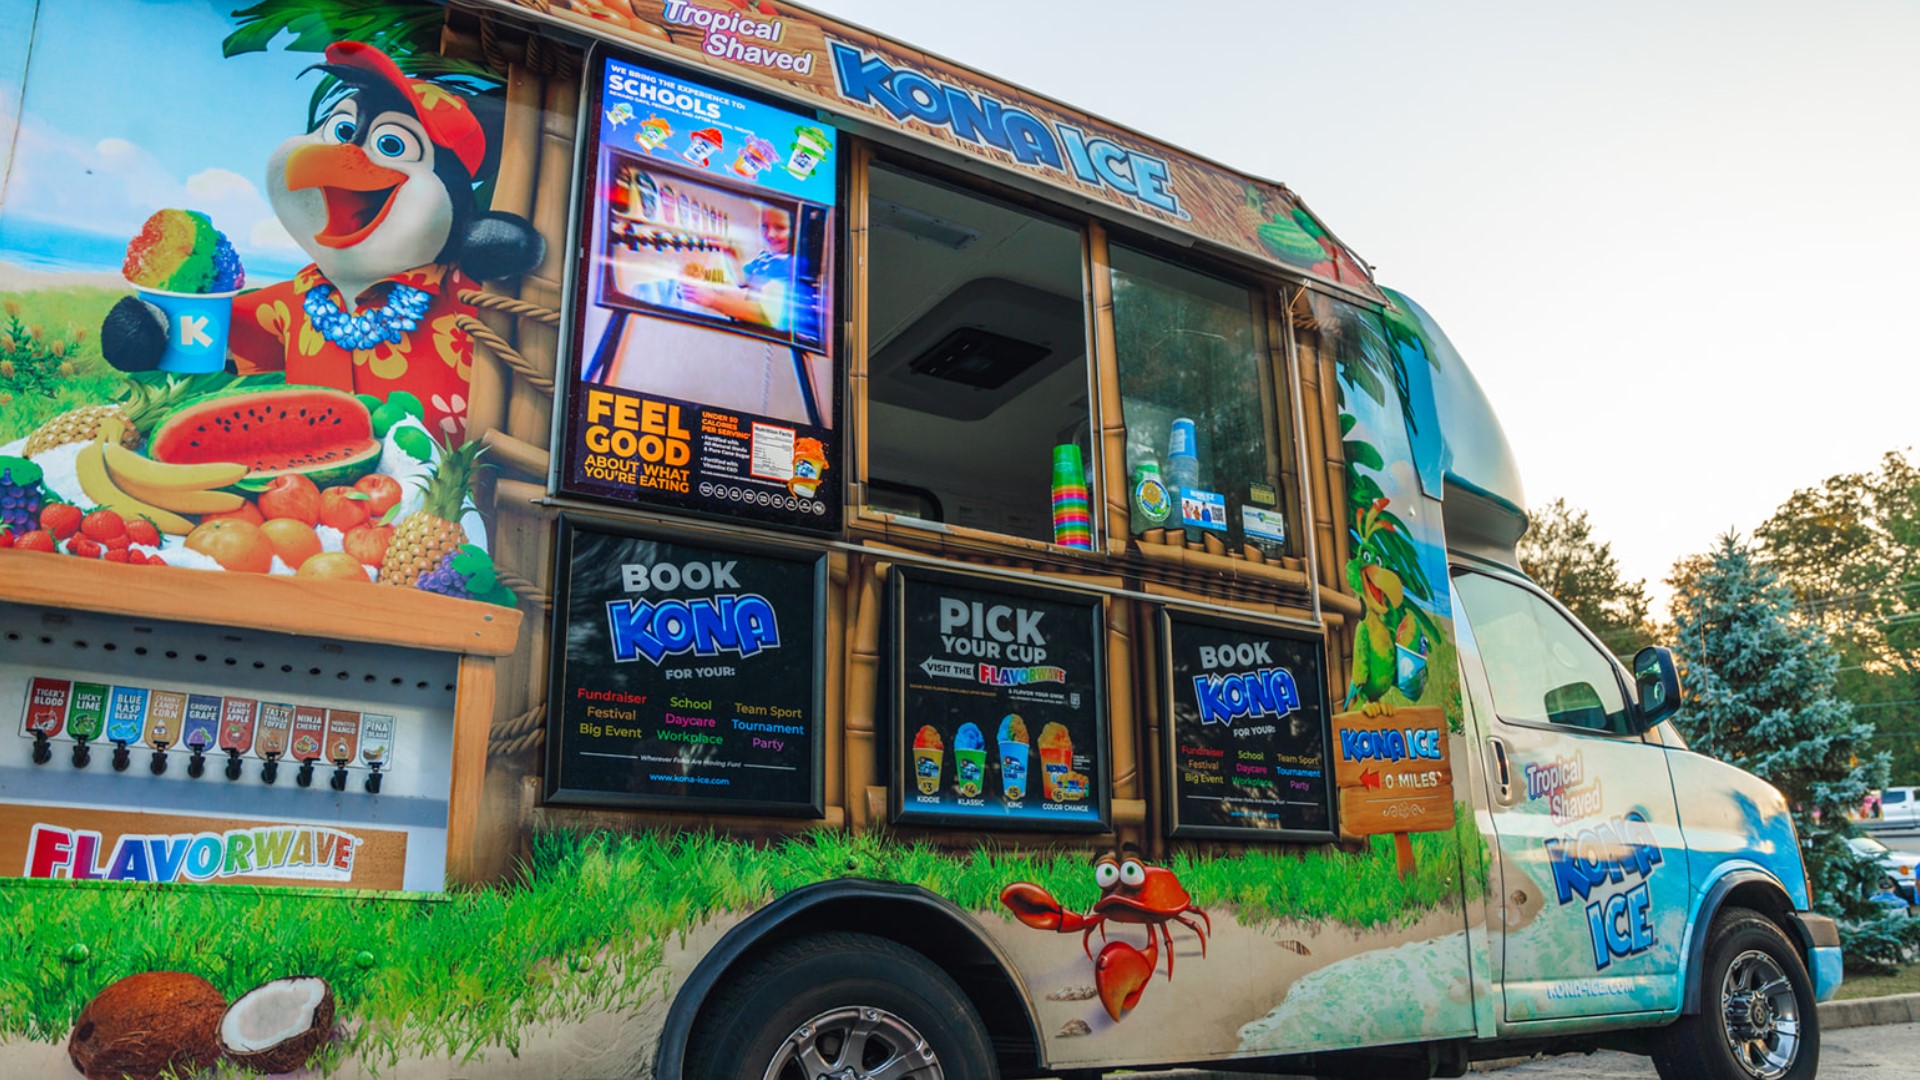 Kona Ice showed off their different flavors of ice.